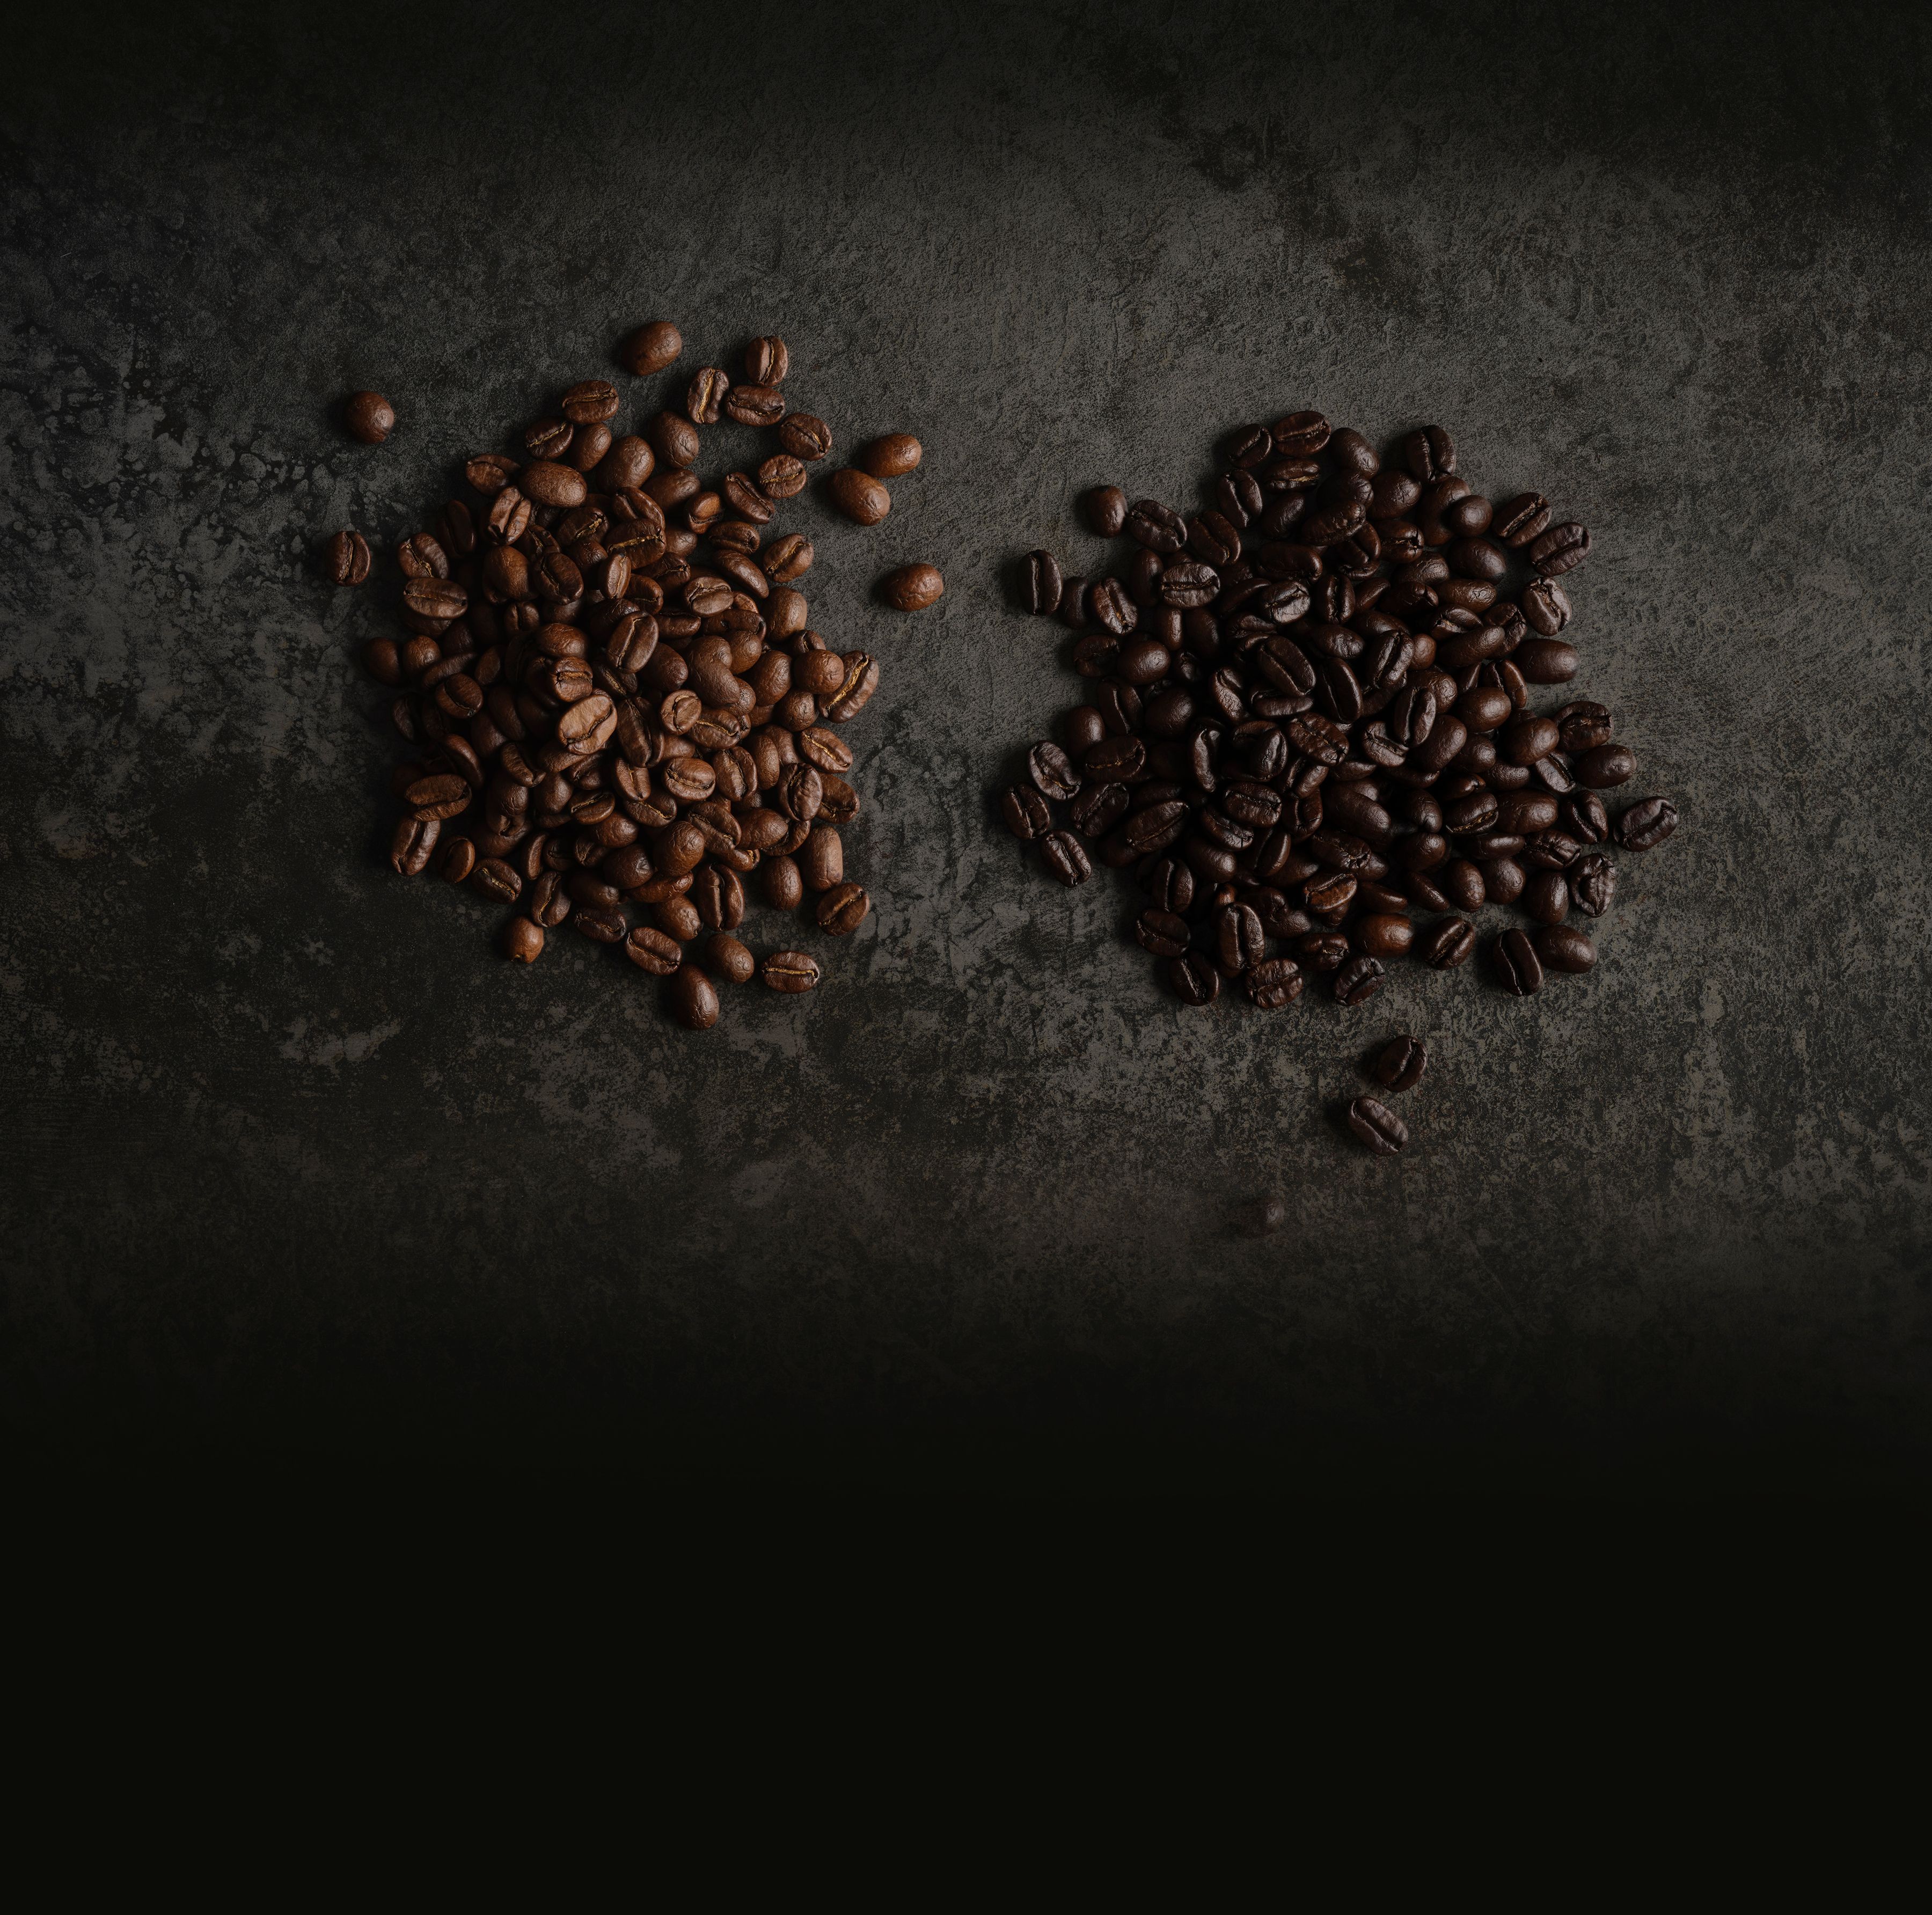 Making Coffee From Whole Beans 101 – Real Good Coffee Co.